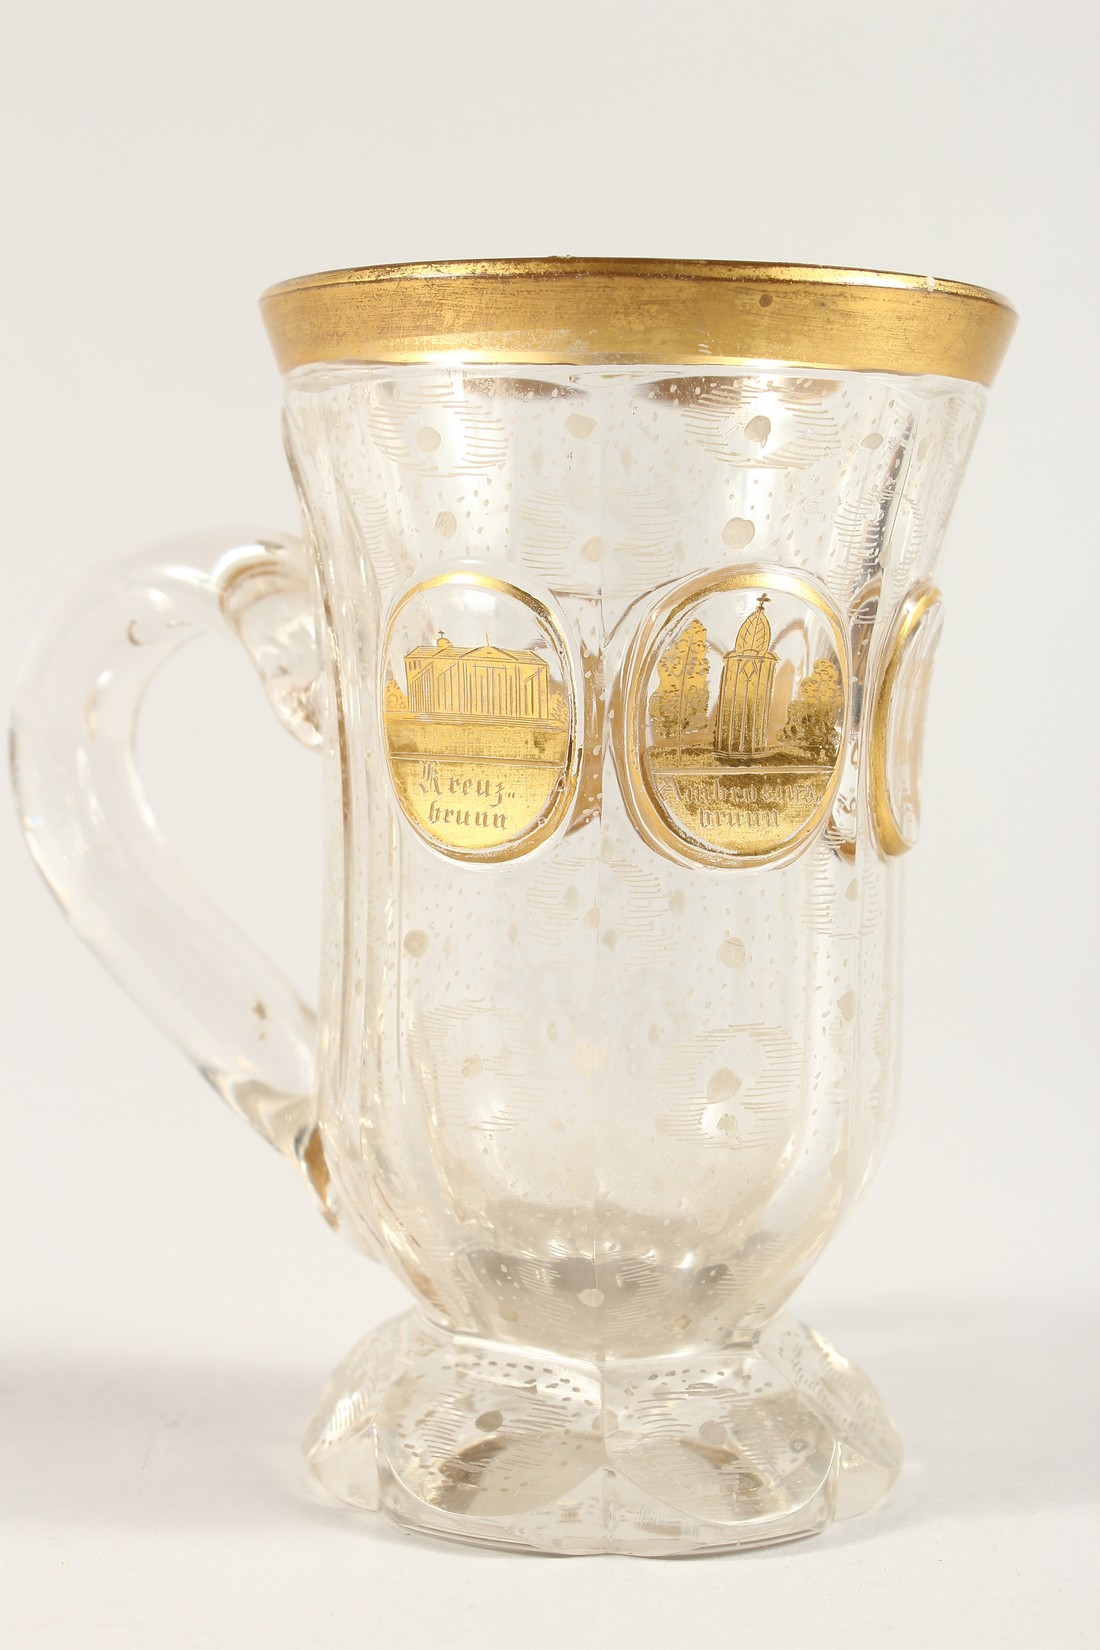 A GOOD BOHEMIAN GILT DECORATED GOBLET with handle, with a scene of buildings 4.75ins high. - Image 5 of 7